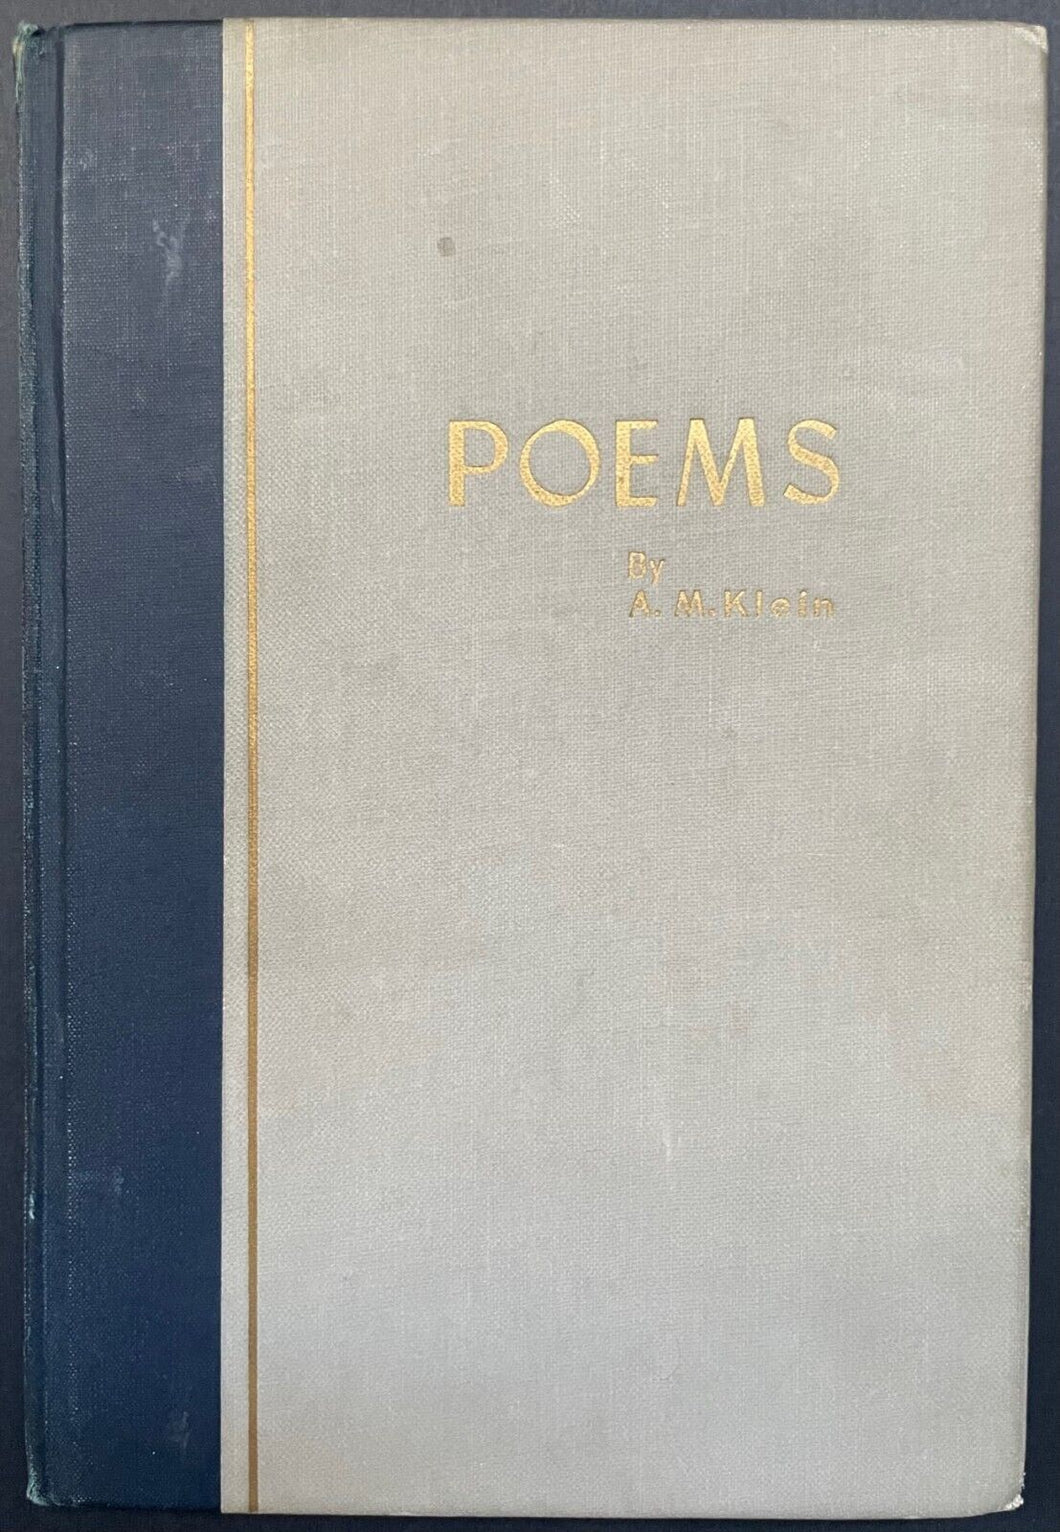 1945 “Poems” Hardcover Book A.M. Klein Jewish Book Of Poems + 1945 News Article